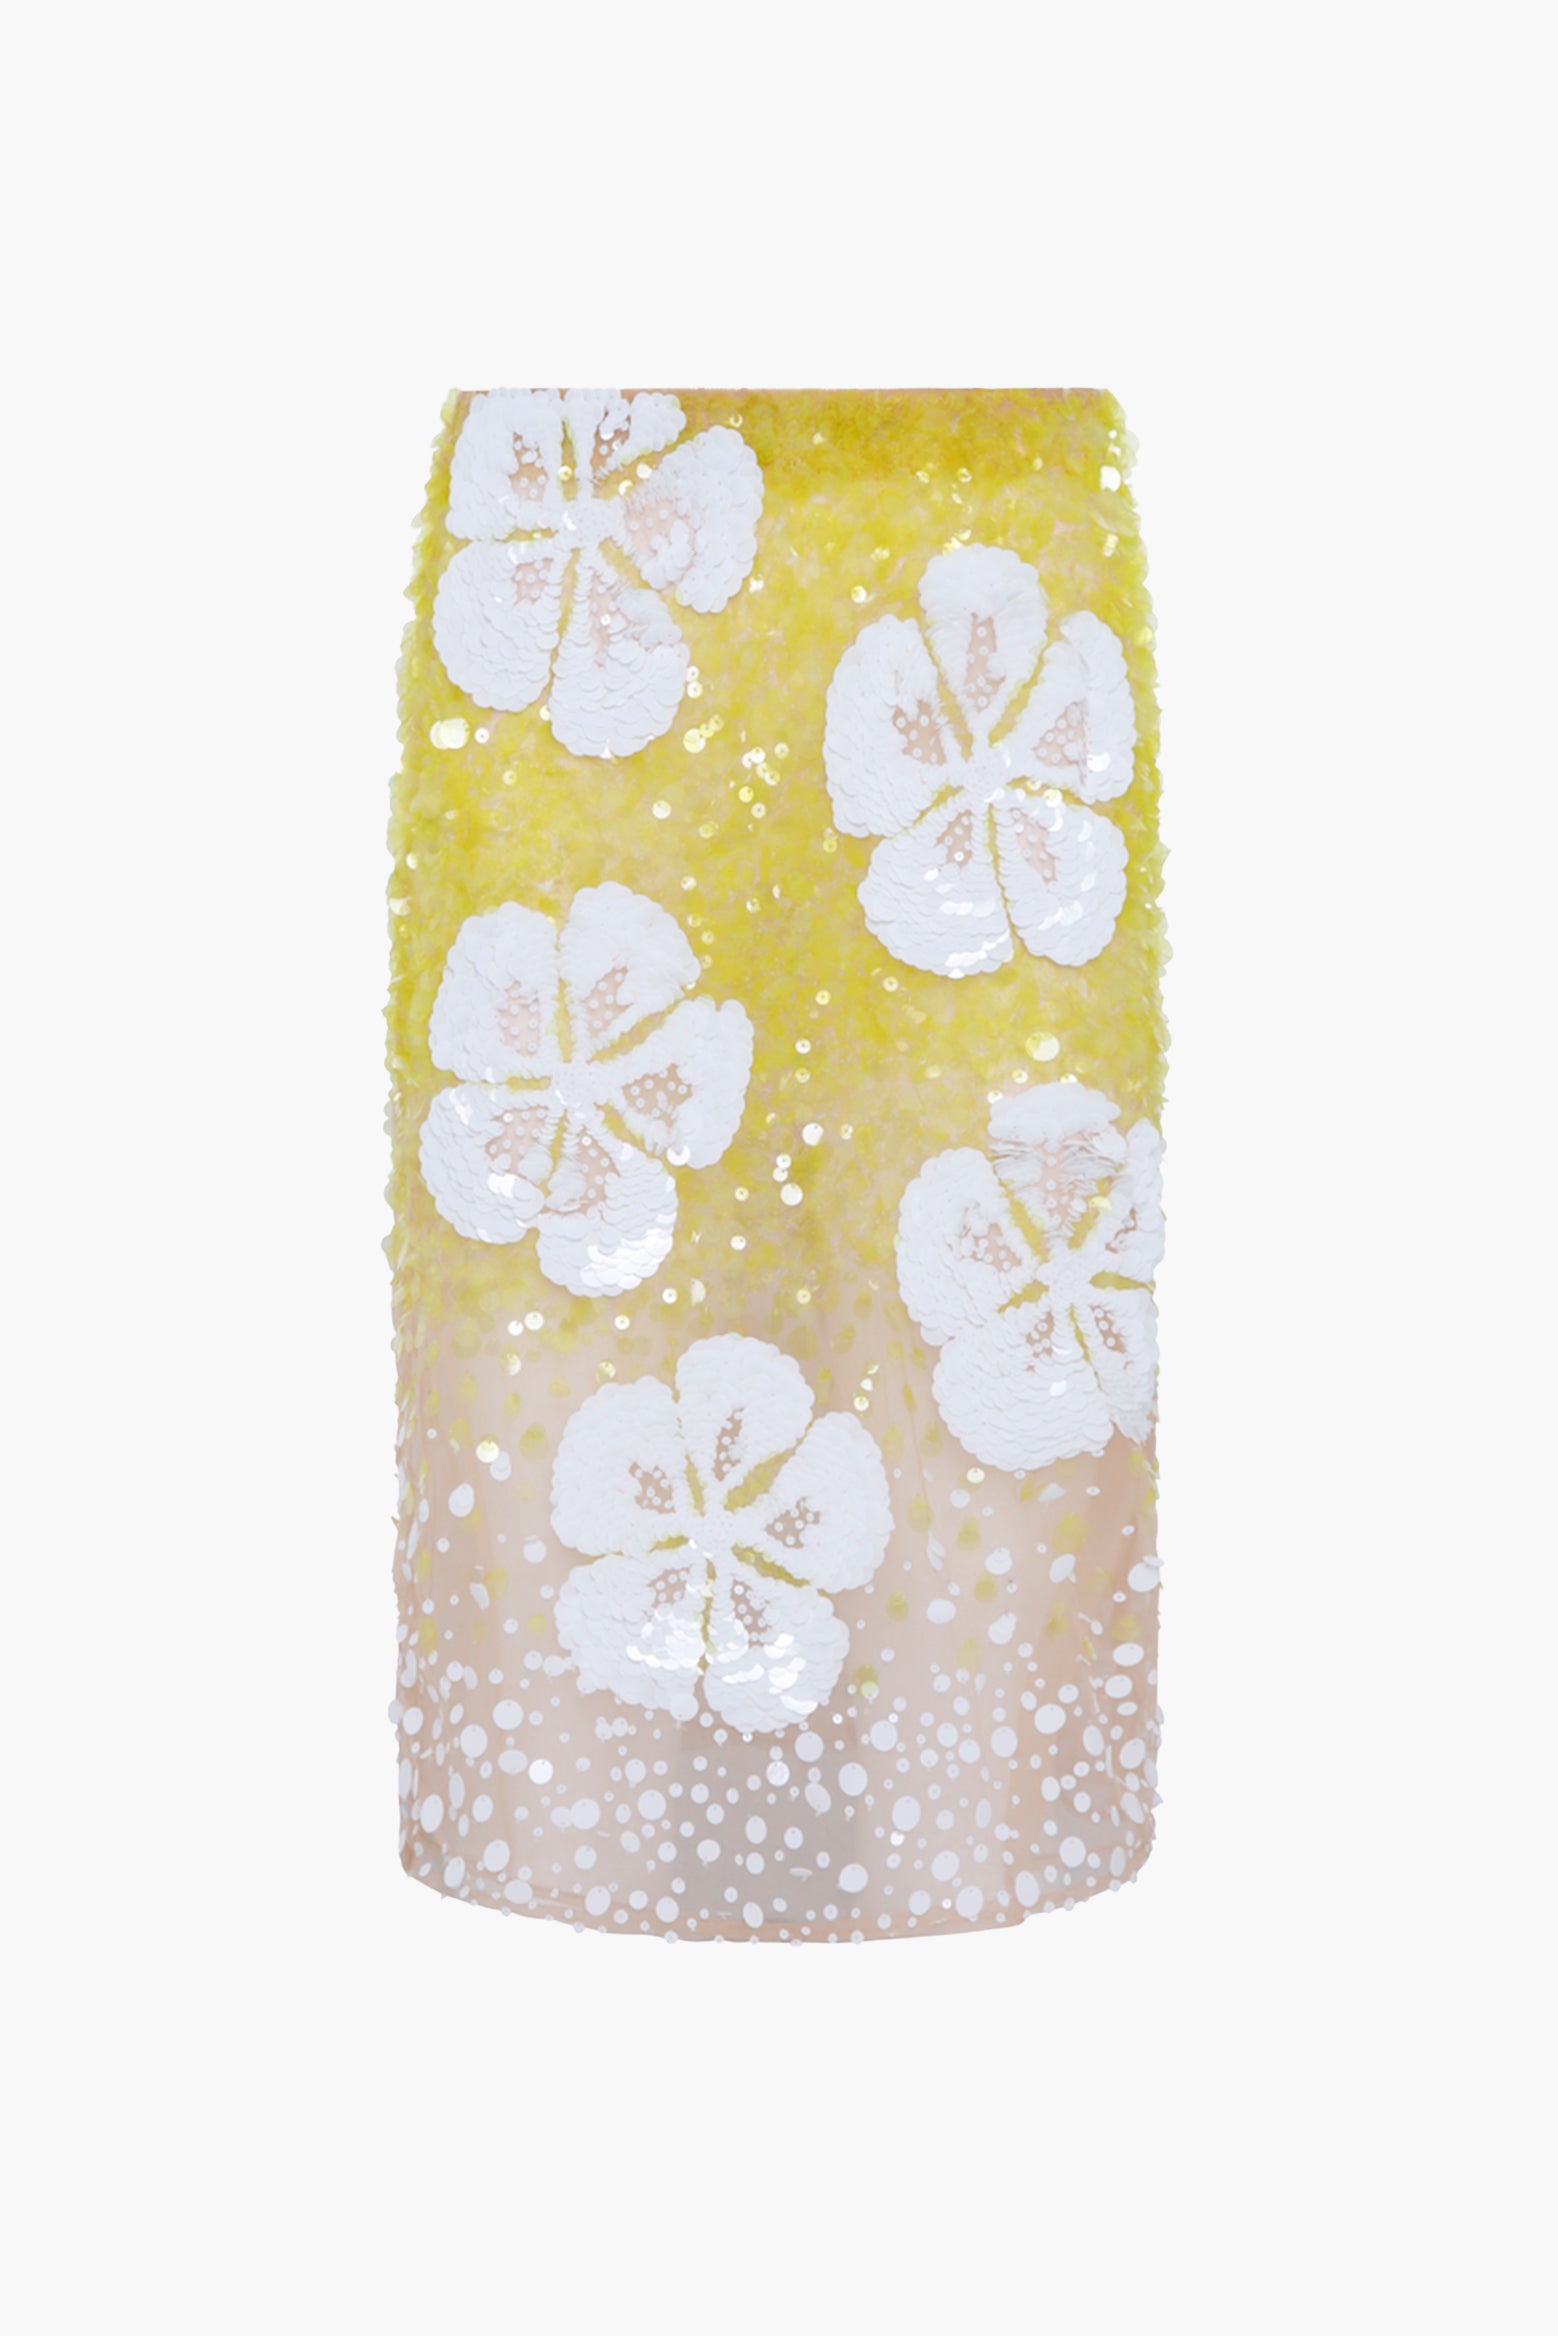 Des Phemmes Hibiscus Embroidery Skirt in Lime available at The New Trend Australia. 